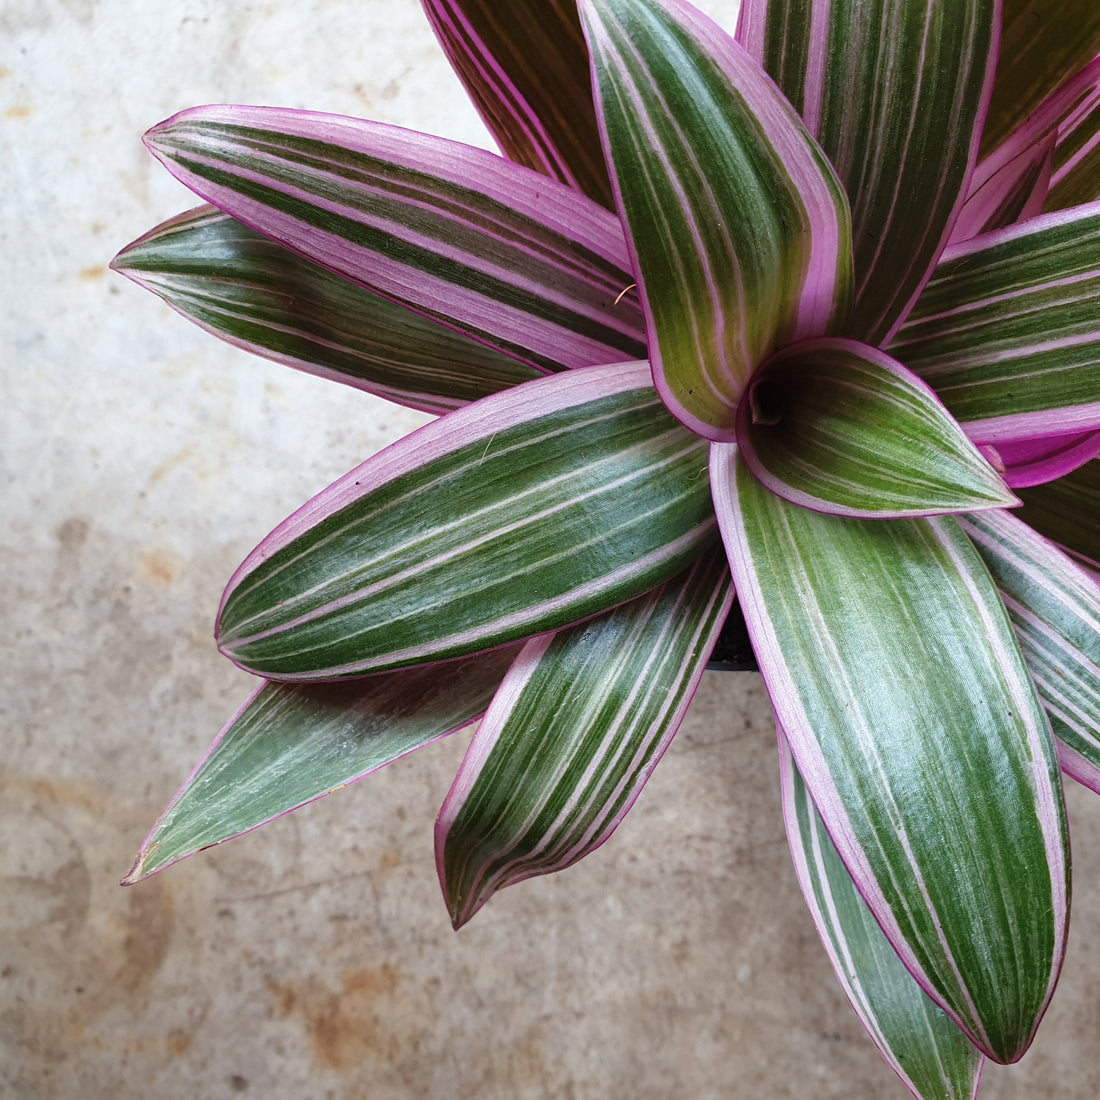 Tradescantia spathacea (Oyster plant/ Boat lily/ Moses in the cradle)